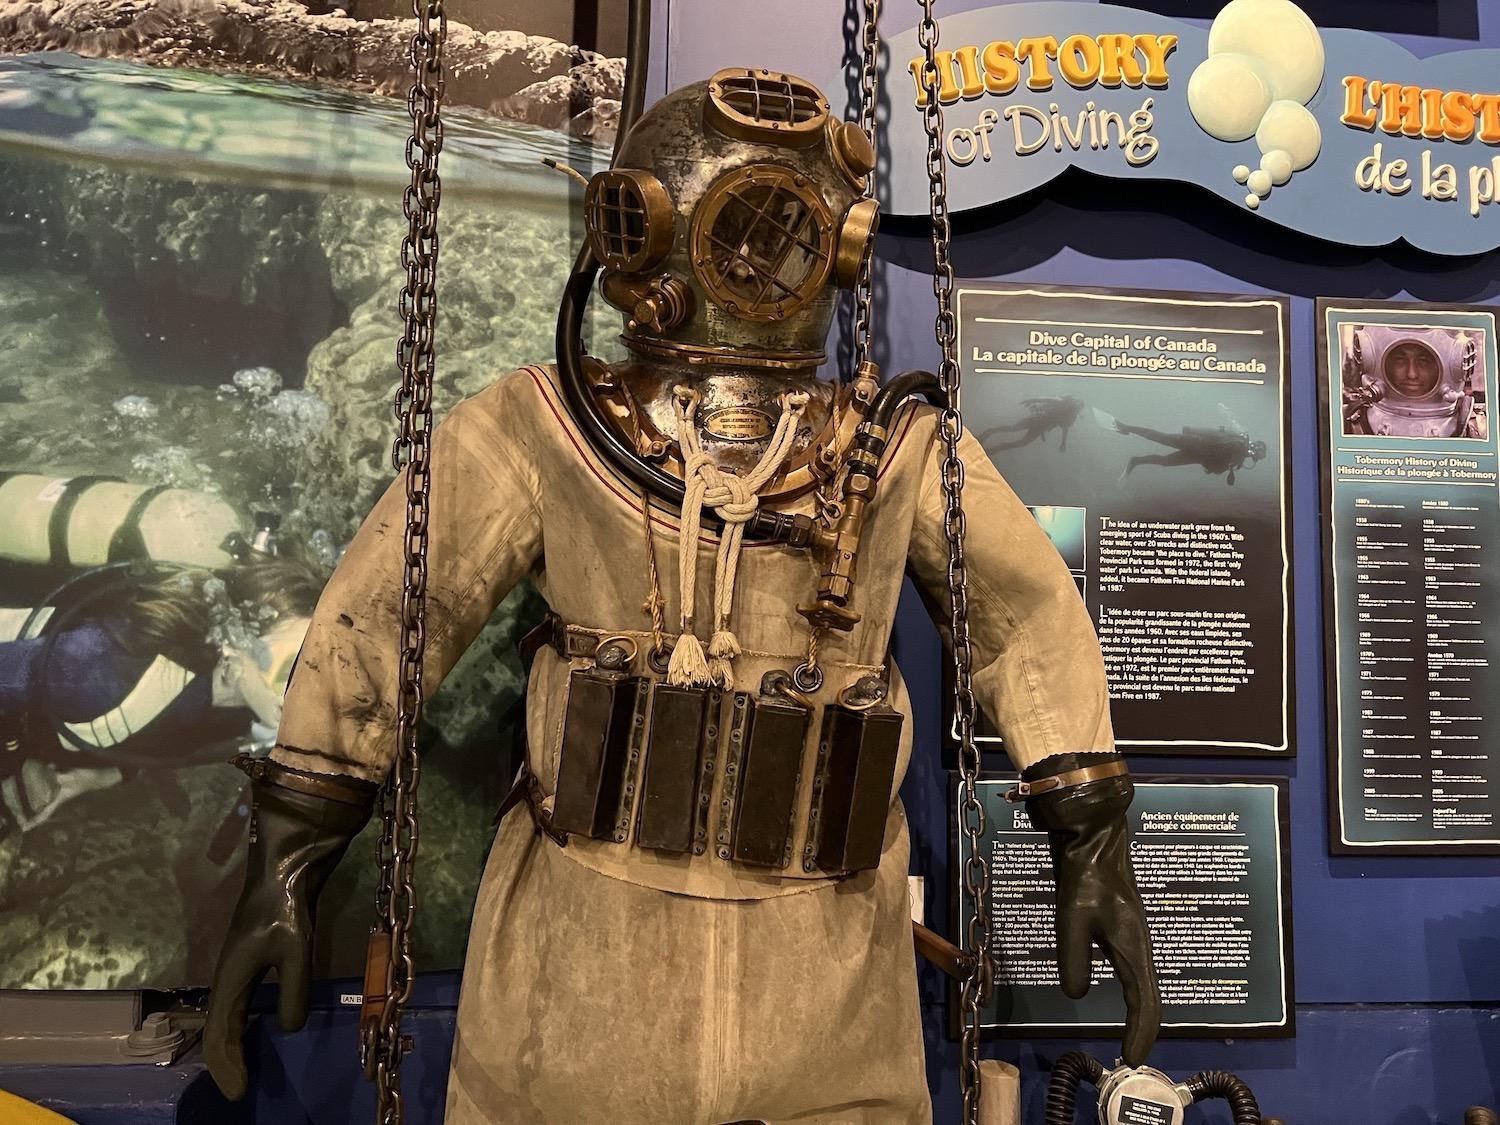 Tobermory has long attracted divers and vintage gear is on display at the Parks Canada visitor center for Bruce Peninsula National Park and Fathom Five National Marine Park.